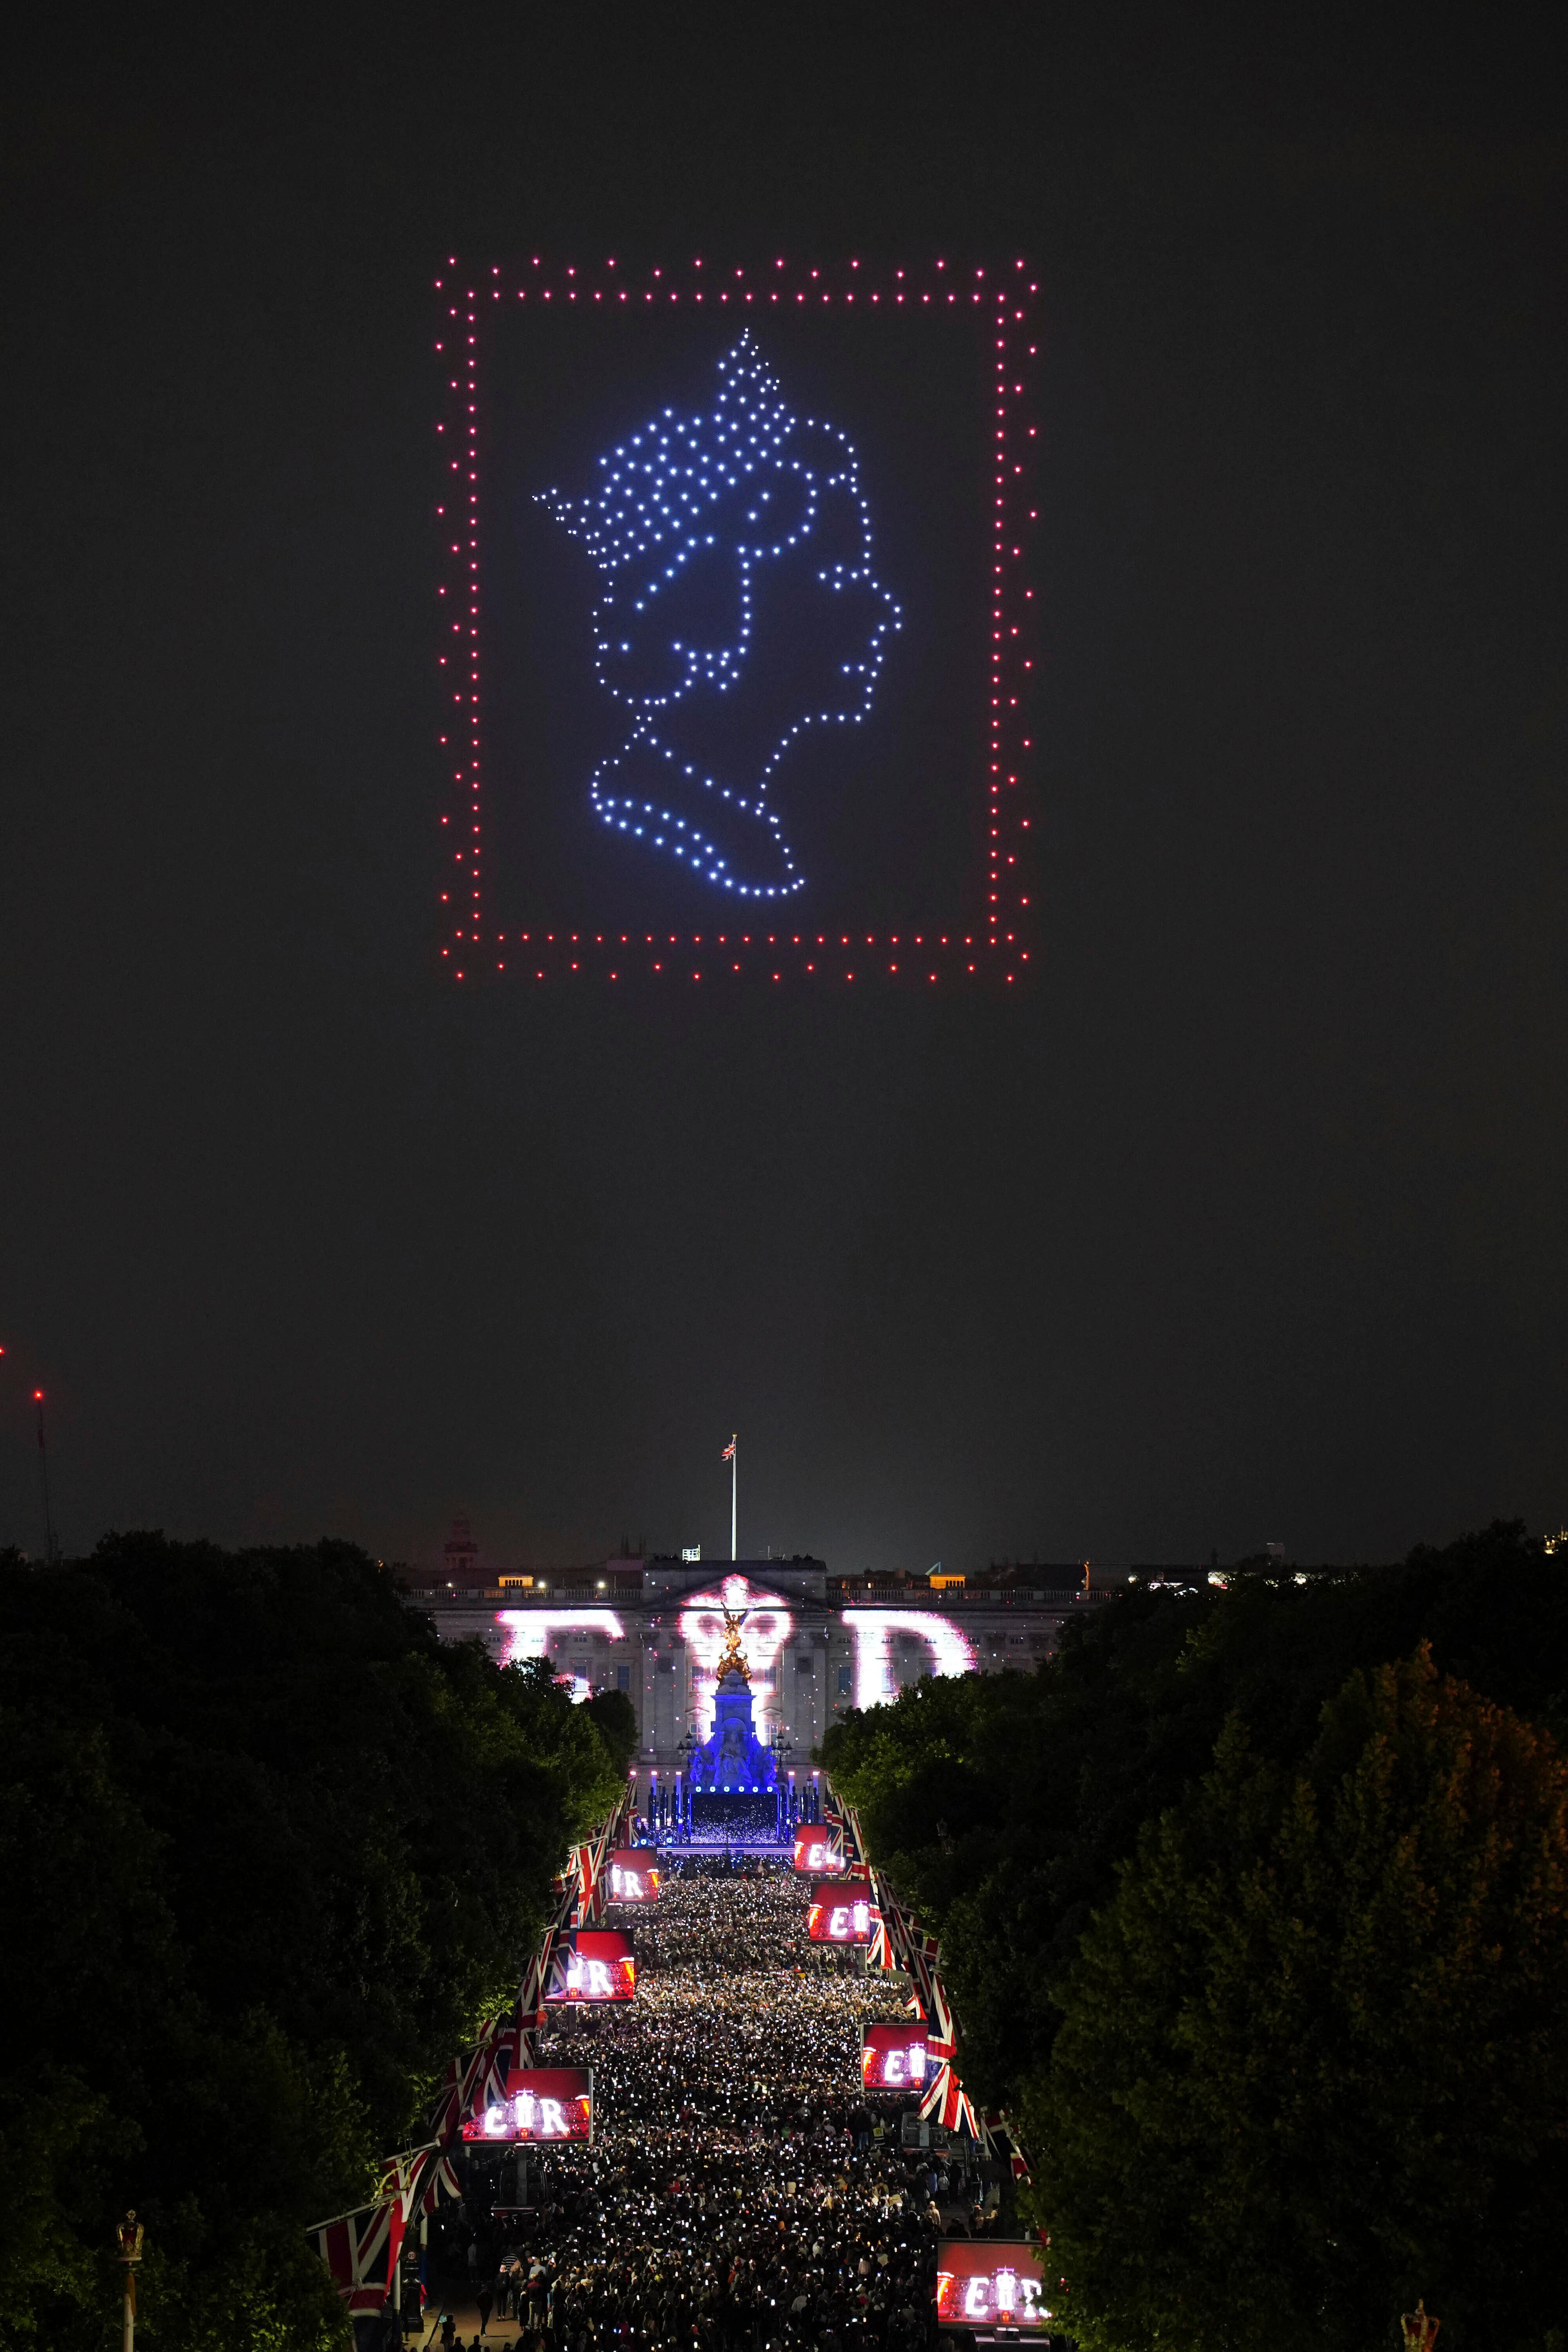 Drones with lights form the shape of the Queen on a postage stamp above Buckingham Palace